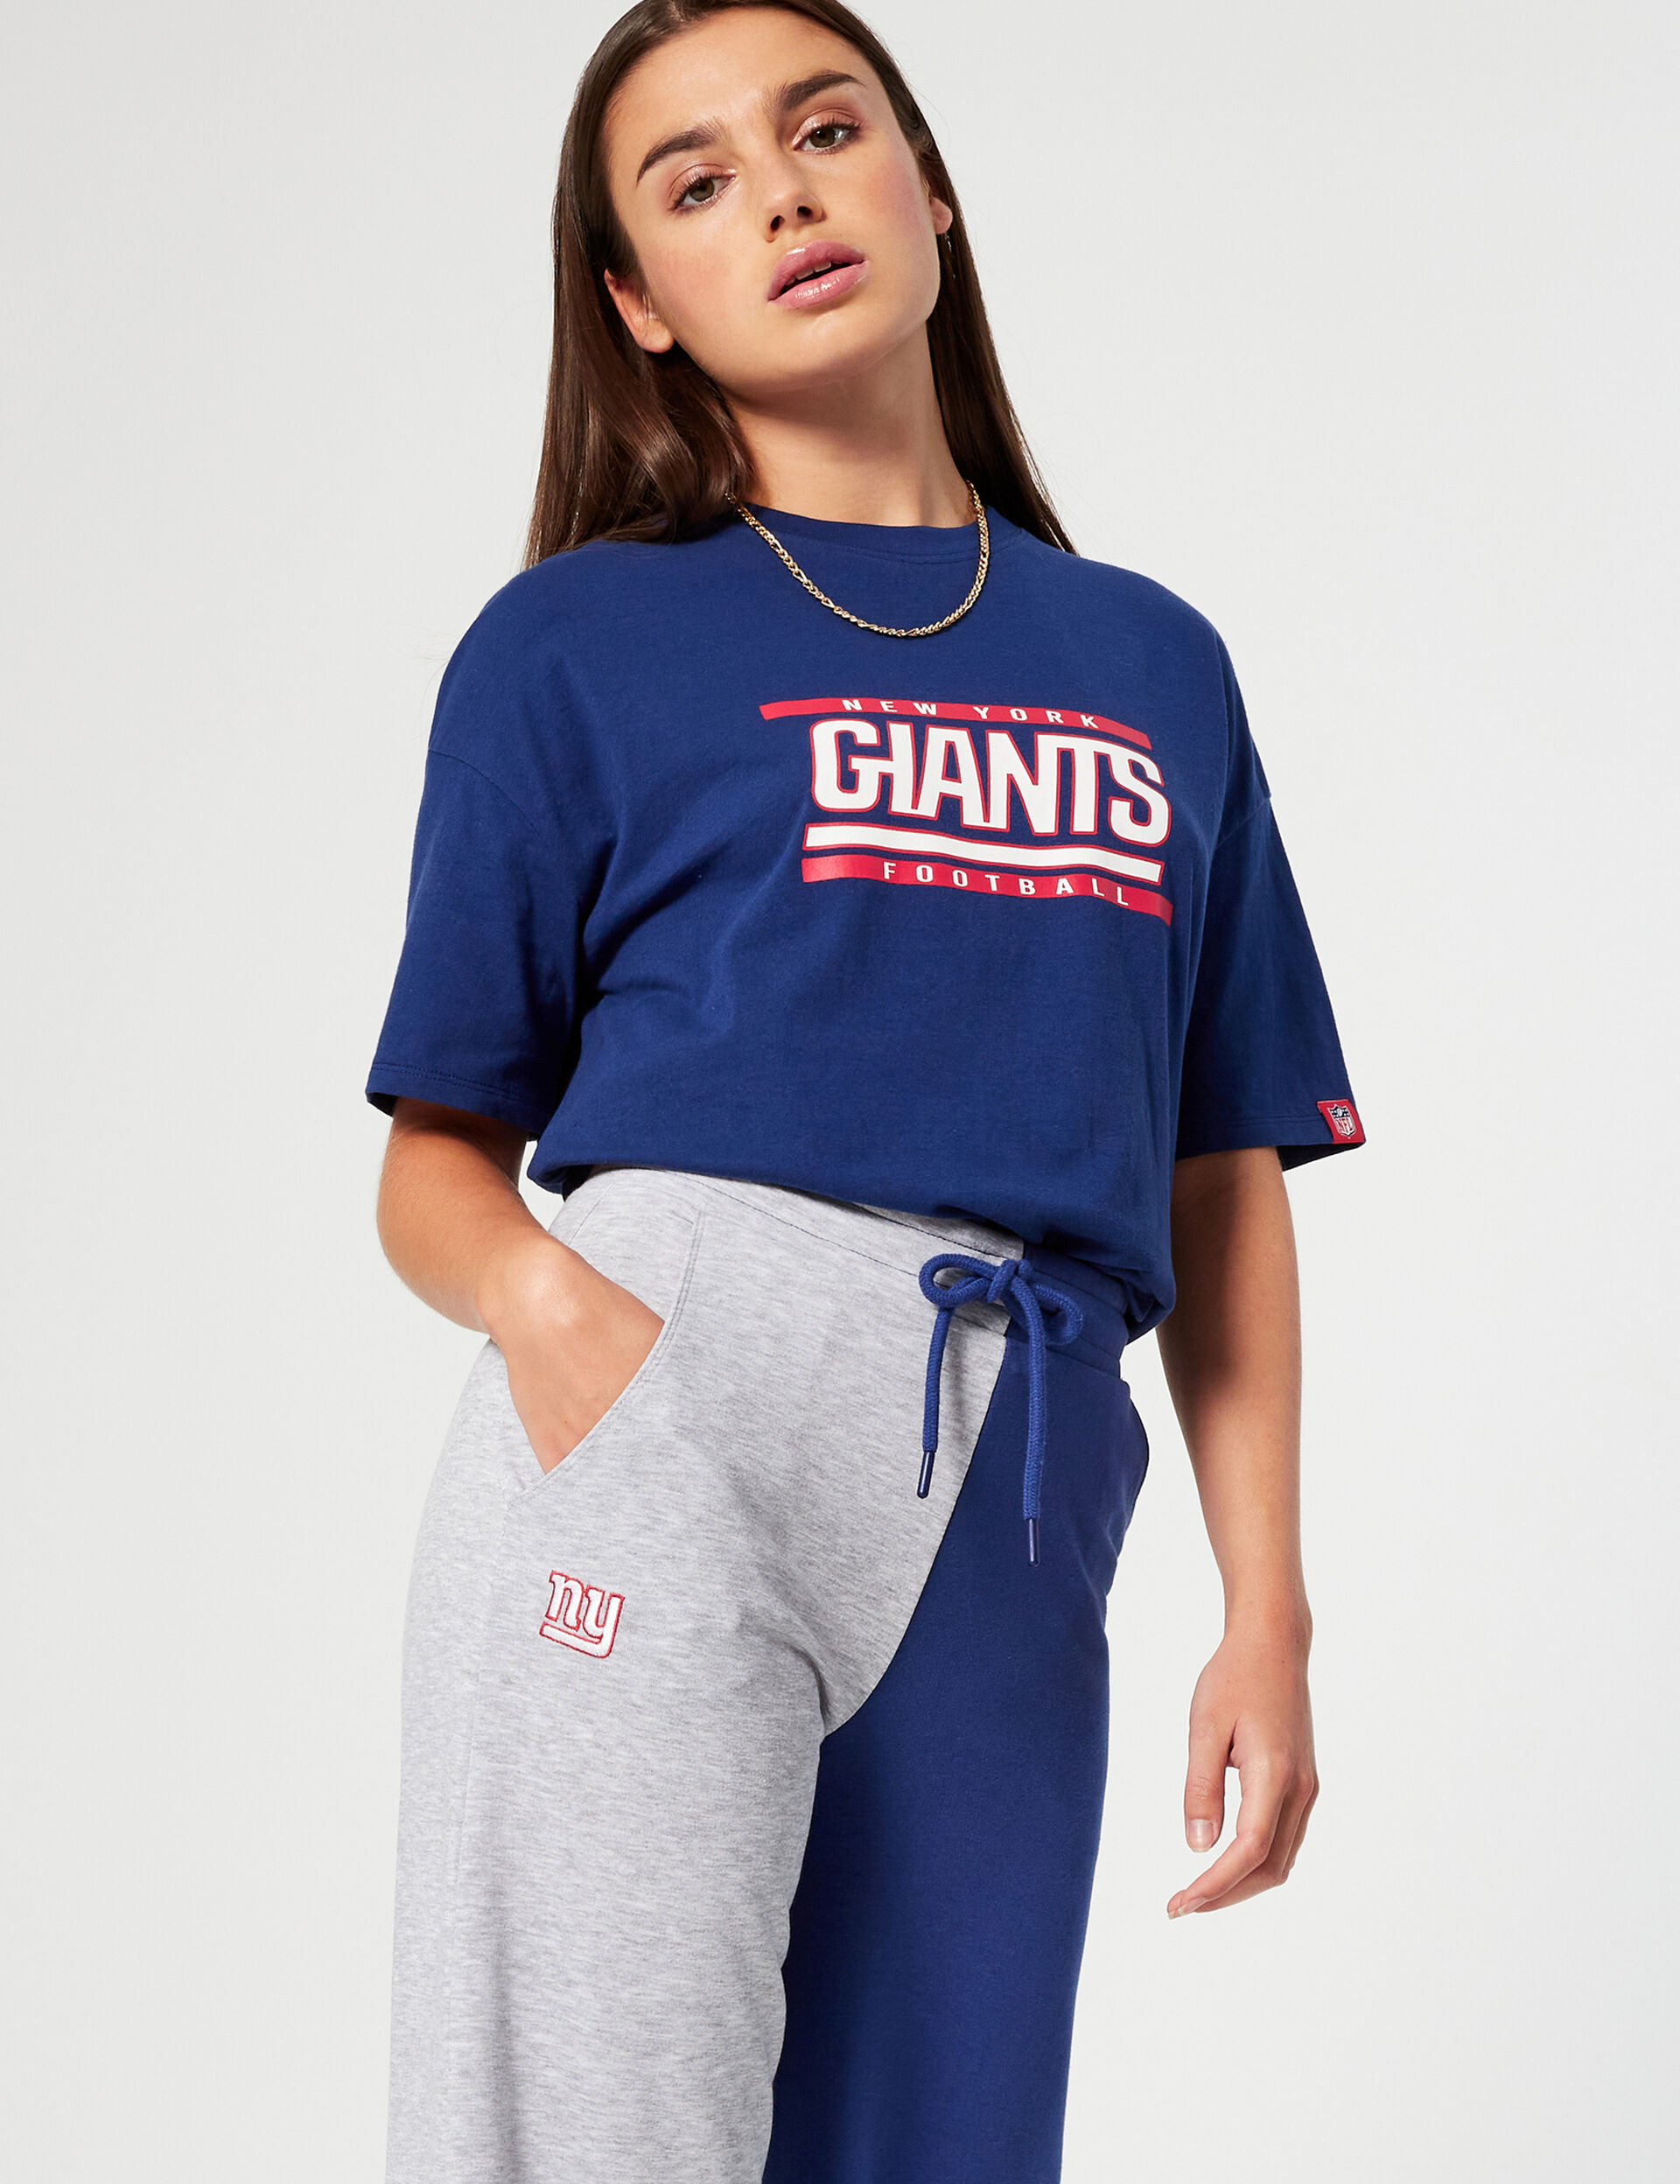 Two-tone NFL joggers